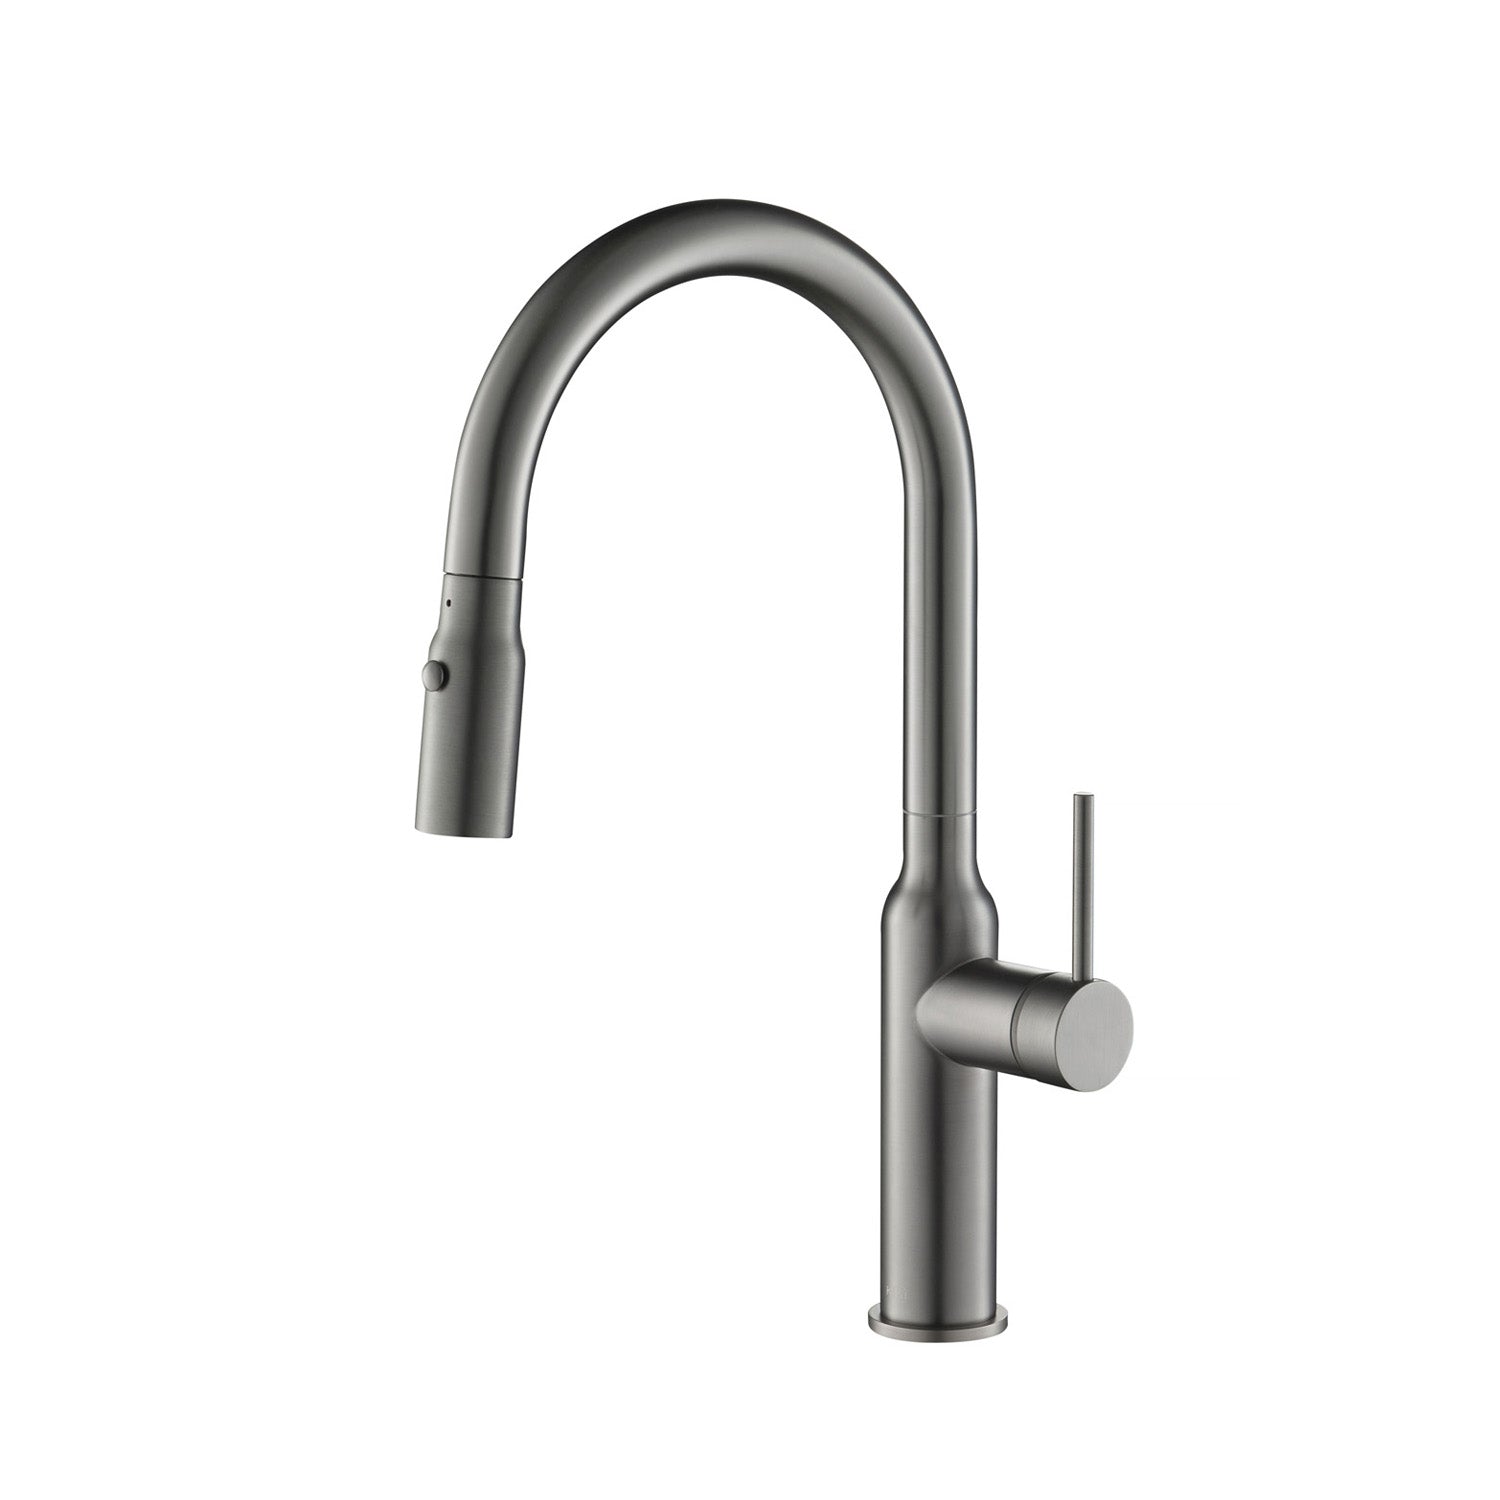 Kibi Hilo Single Handle High Arc Pull Down Kitchen Faucet With Soap Dispenser in Brushed Nickel Finish